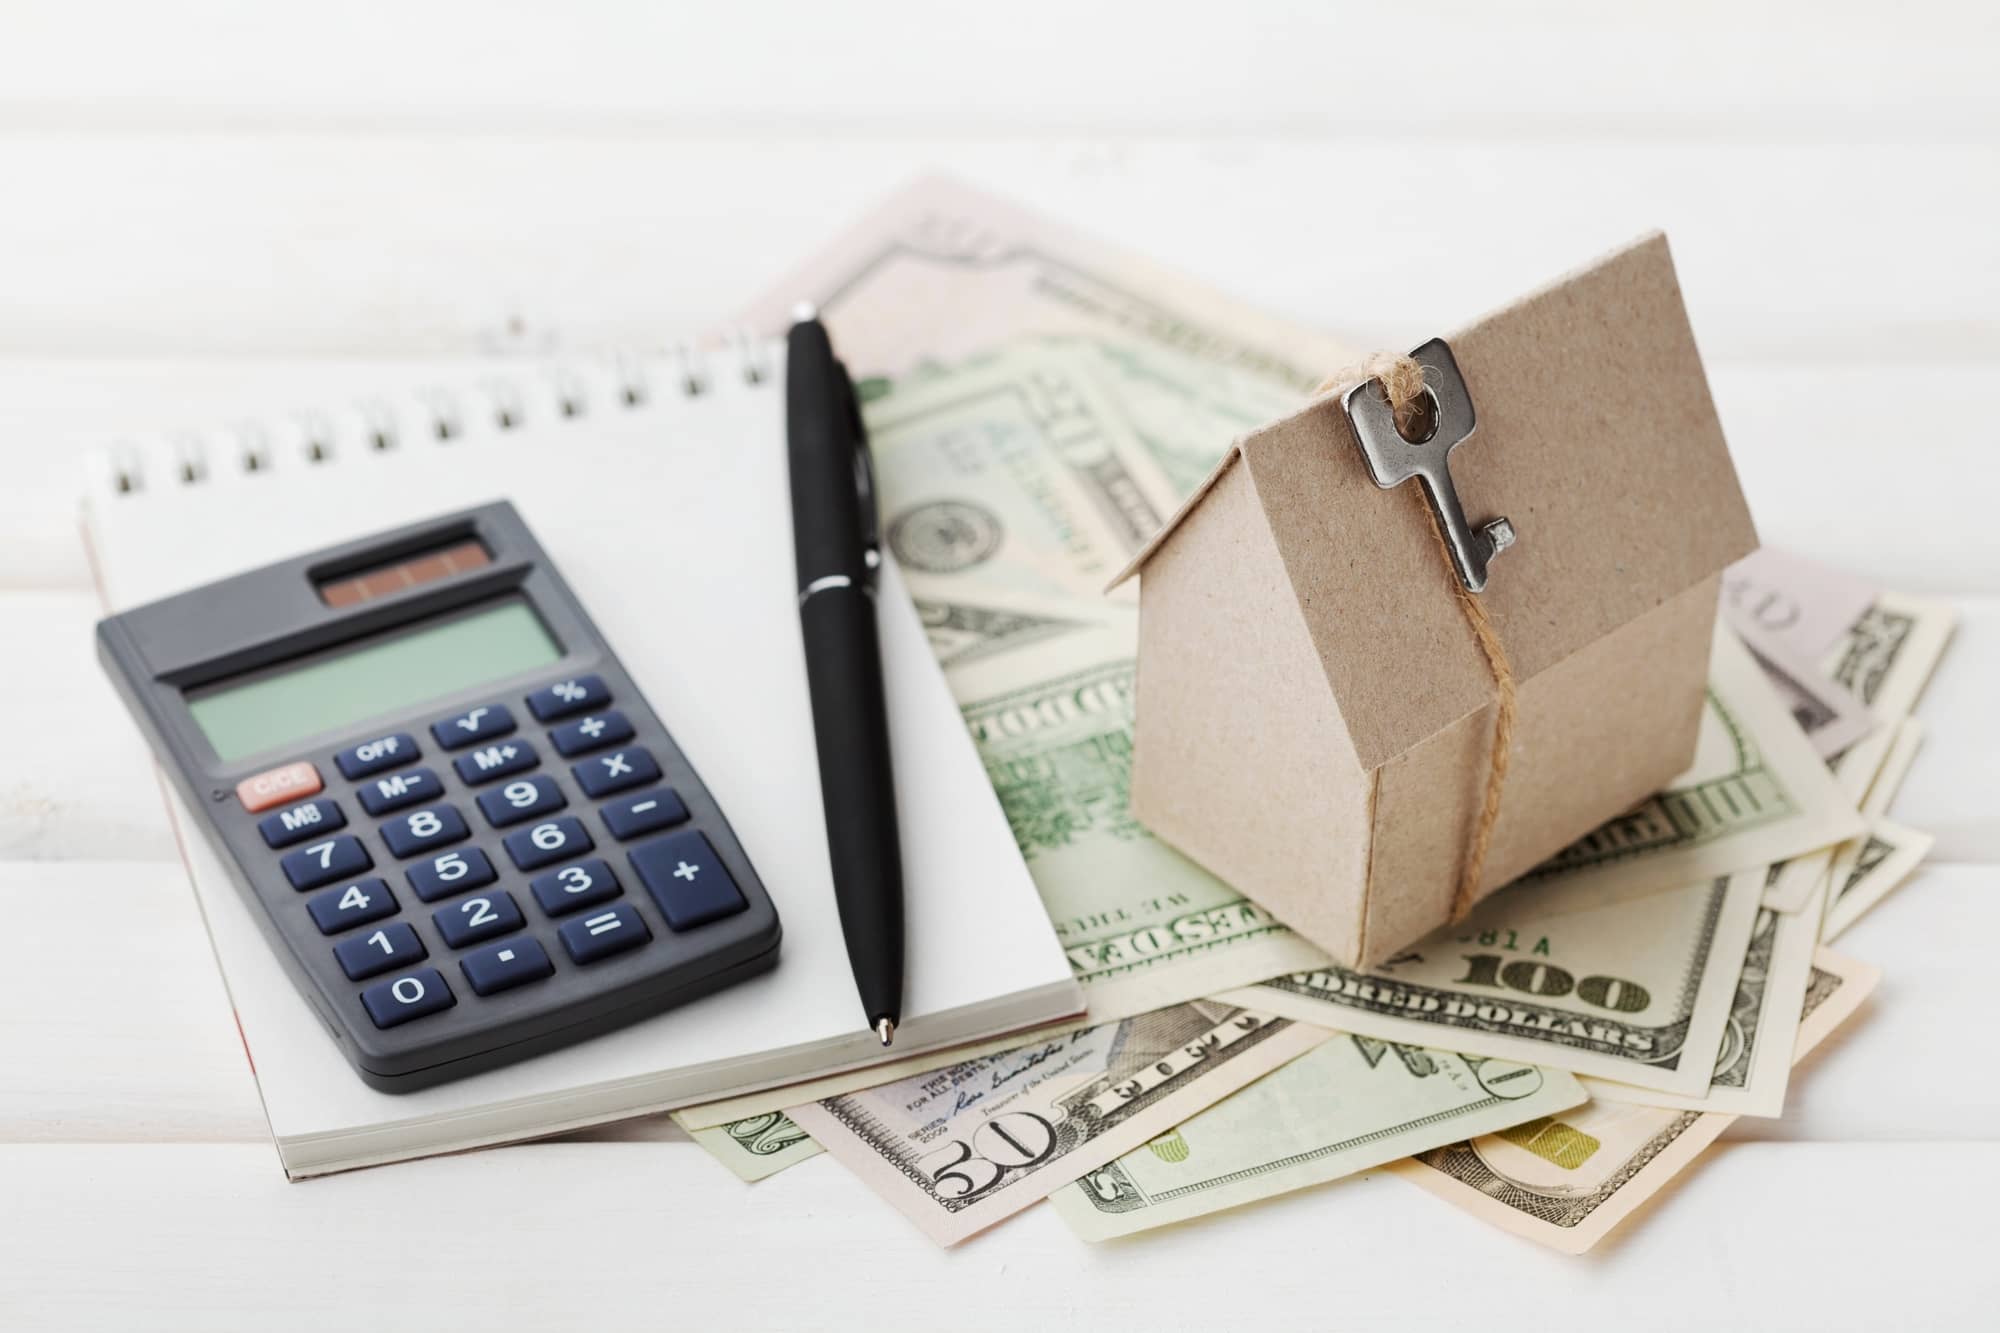 Model of cardboard house with key, calculator, notebook, pen and cash dollars. House building, loan, real estate